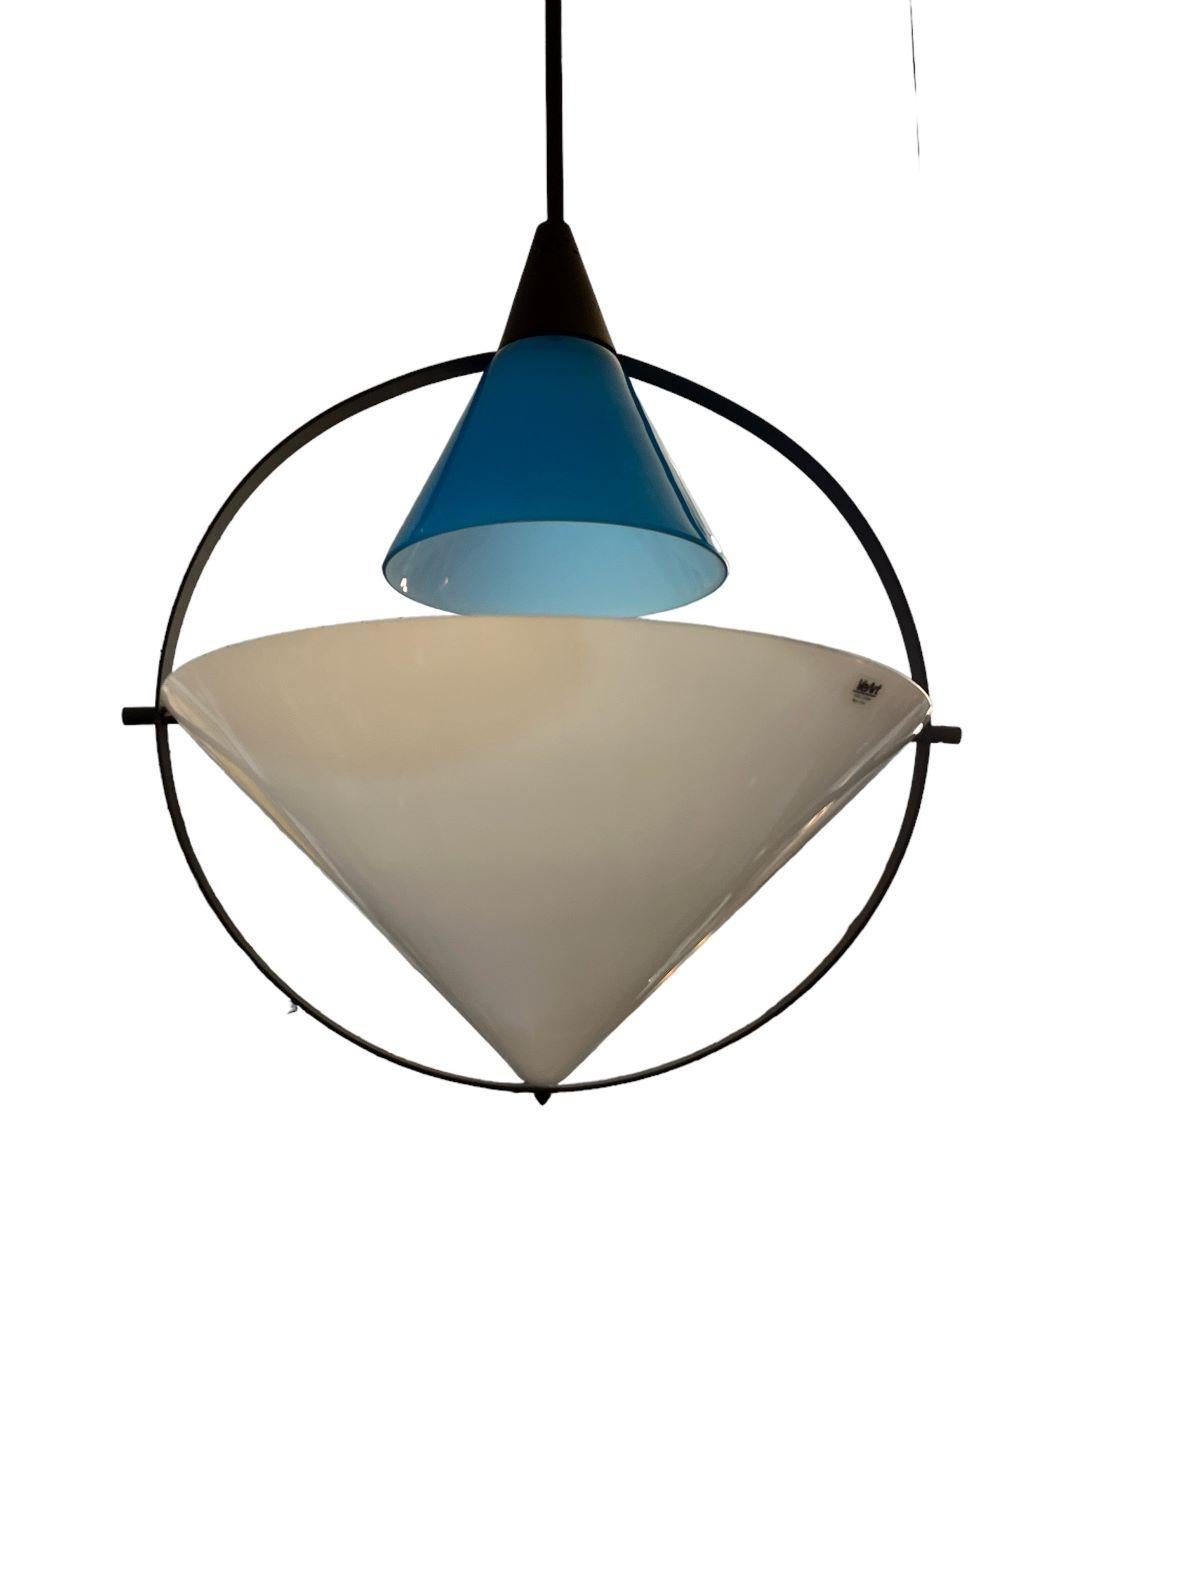 Late 20th Century Dede Ceiling Lamp By Enzo Berti, Artisan Production Veart, Italy Circa 1980’s For Sale